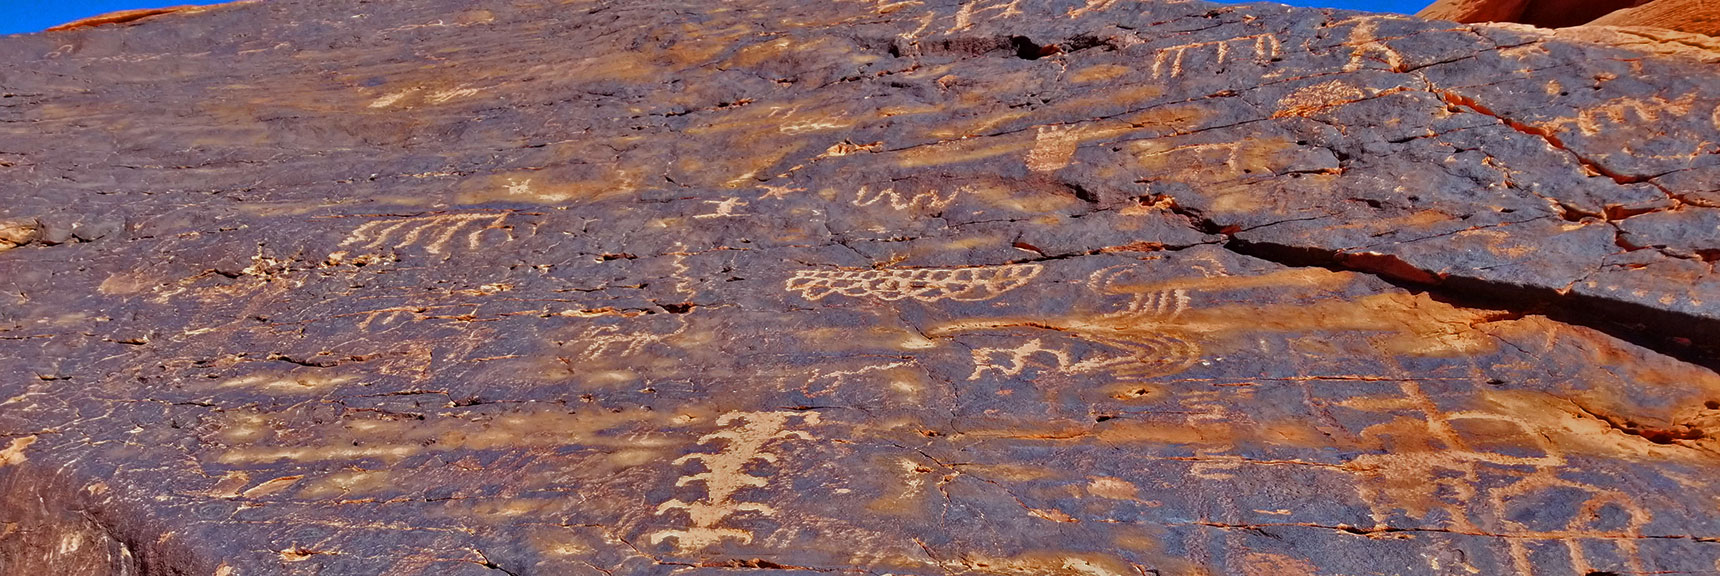 Petroglyphs on Mouse's Tank Trail in Valley of Fire State Park, Nevada, Slide 11